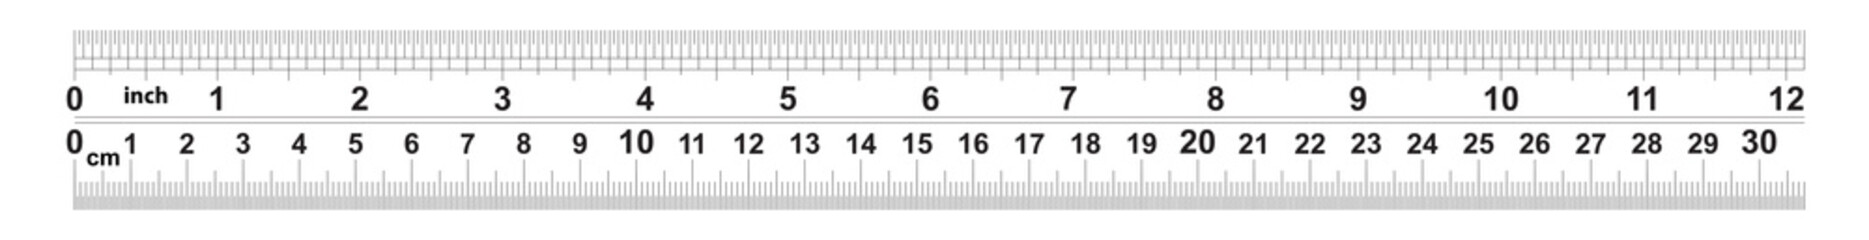 Ruler 12 inshes. Ruler 30 centimeters. Value of division - 32 divisions by inch and 0.5 mm. Precise length measurement device. Calibration grid.